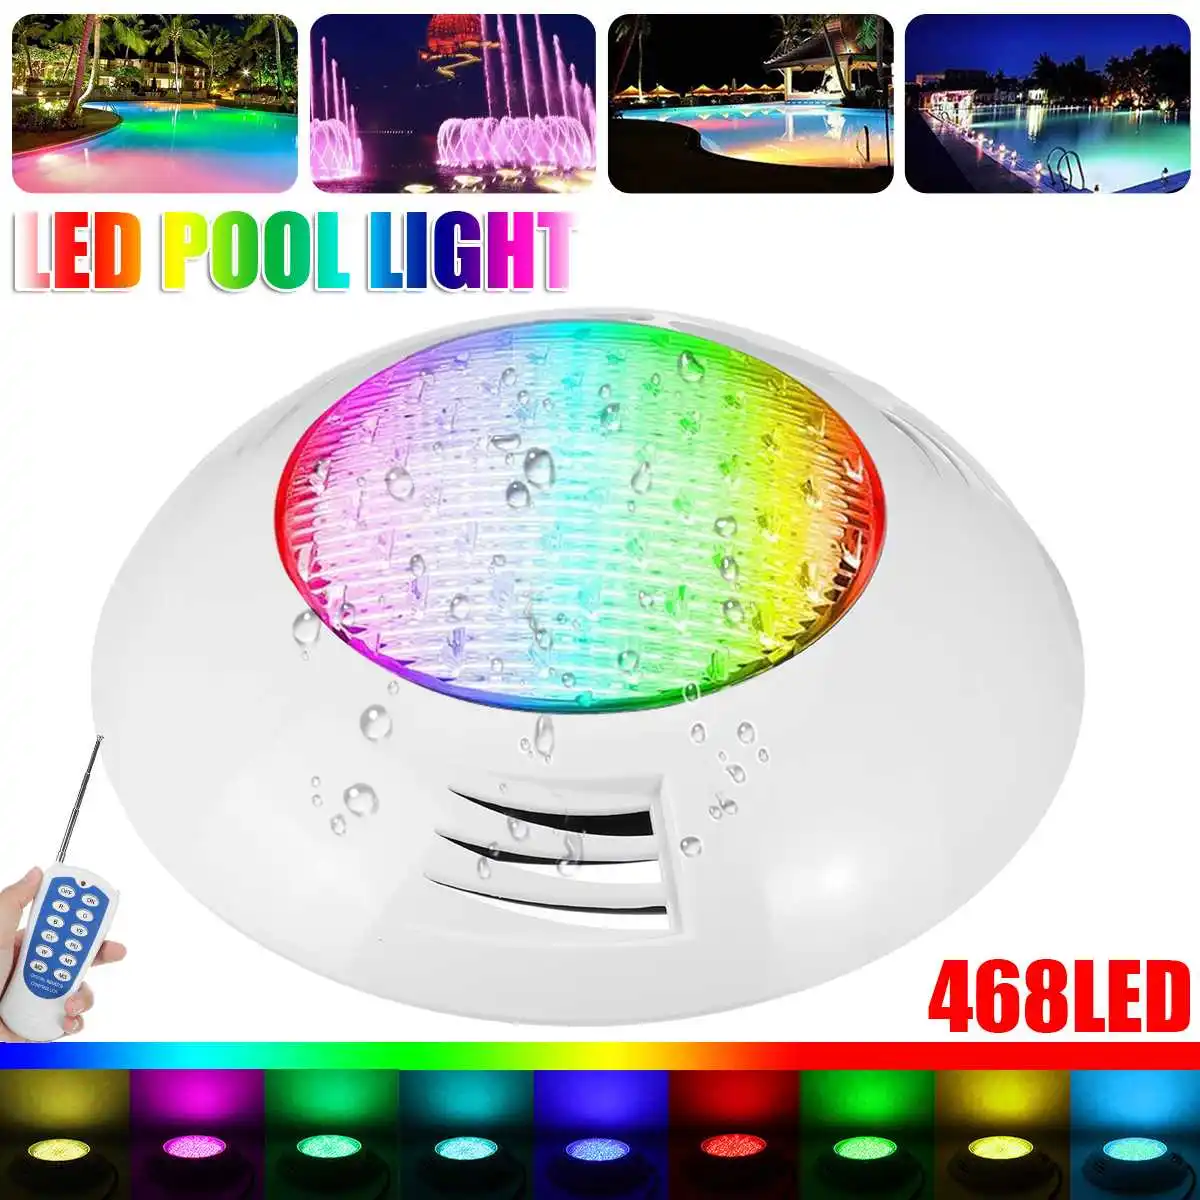 48W 468LED IP68 Underwater Swimming Pool Lights RGB Color Changing, 12V AC,Wall Surface Mounted, with Remote Controller